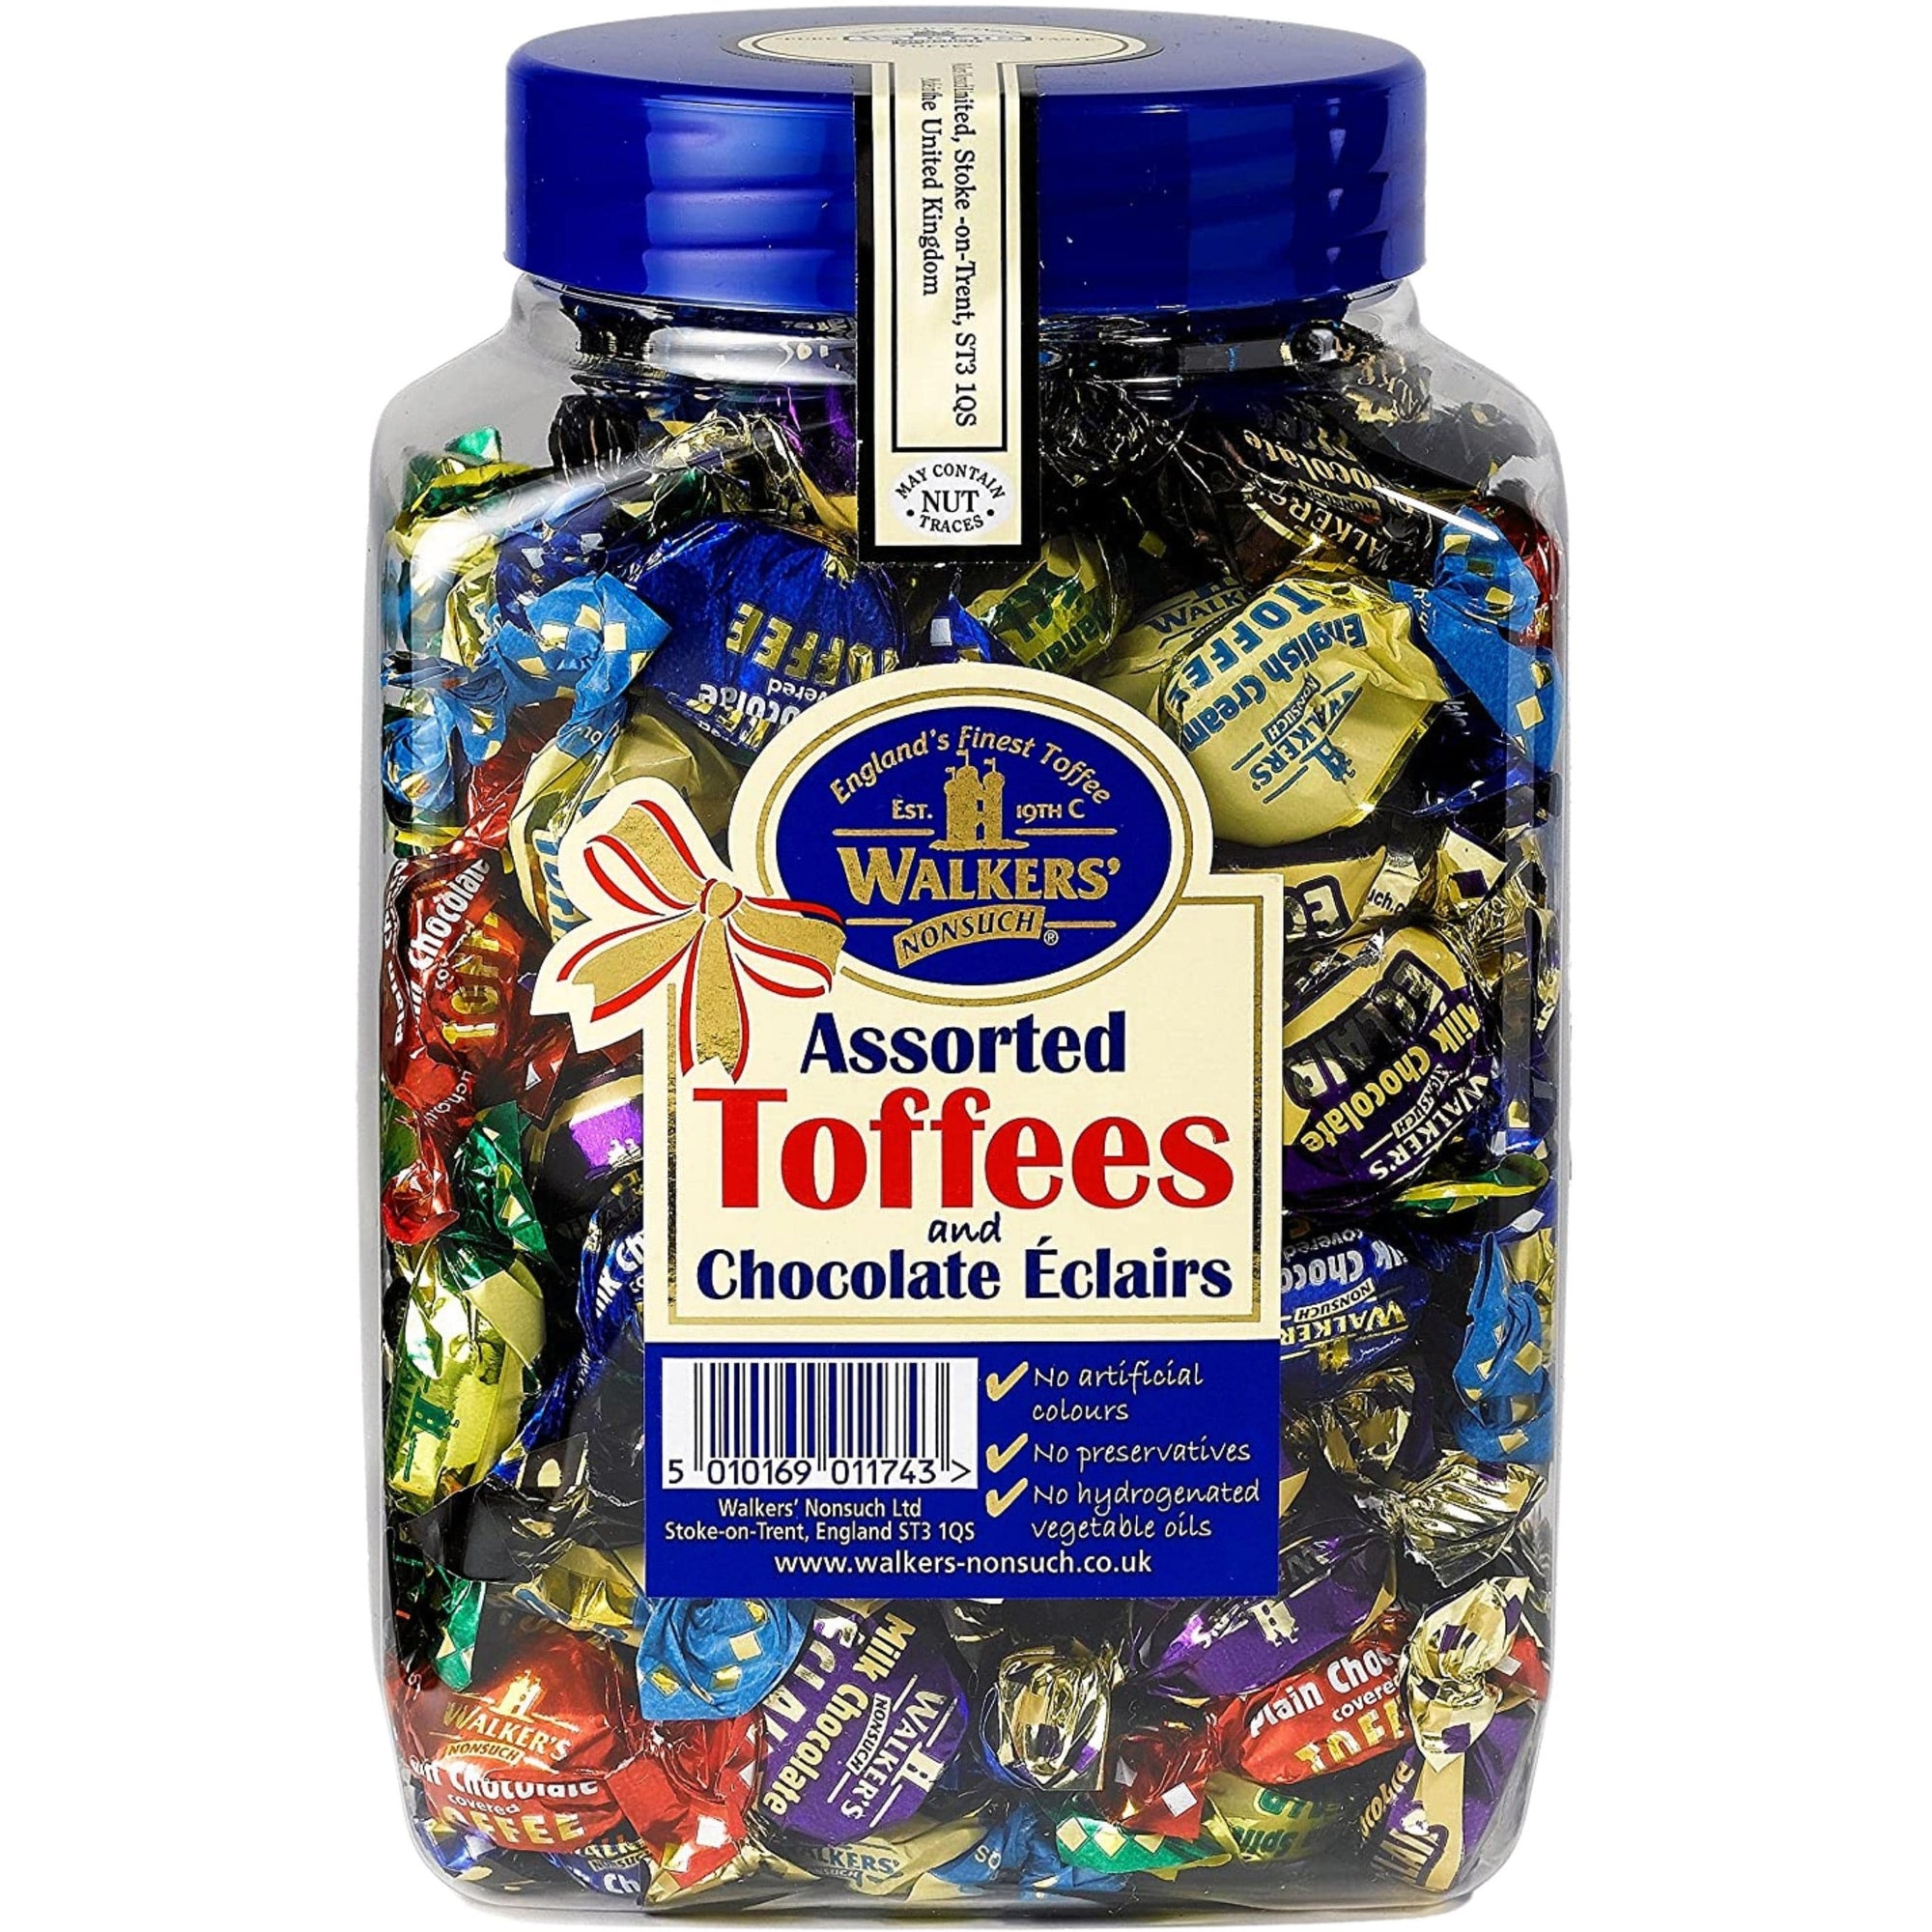 WALKERS Assorted Toffees and Chocolate Eclairs - 1.25Kg - Nammi.net